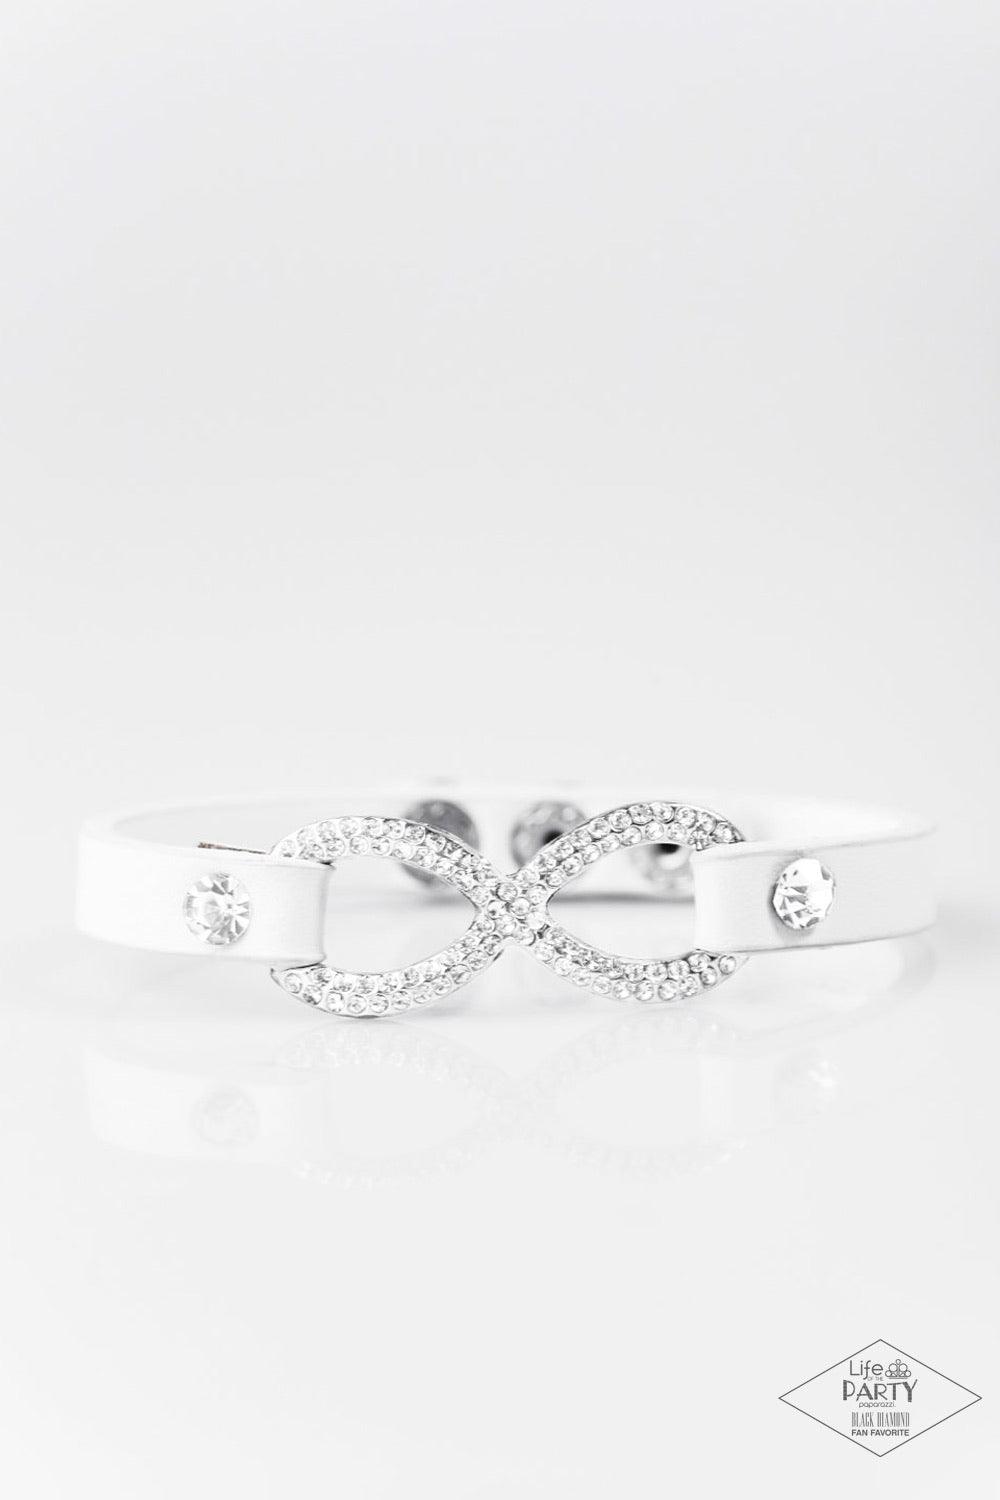 Paparazzi Accessories Innocent Till Proven GLITZY - White A skinny strip of white leather attaches to a silver infinity symbol encrusted in glittery rhinestones. Flanked by two dazzling solitaire rhinestones, the glitzy design creates an incandescent cent